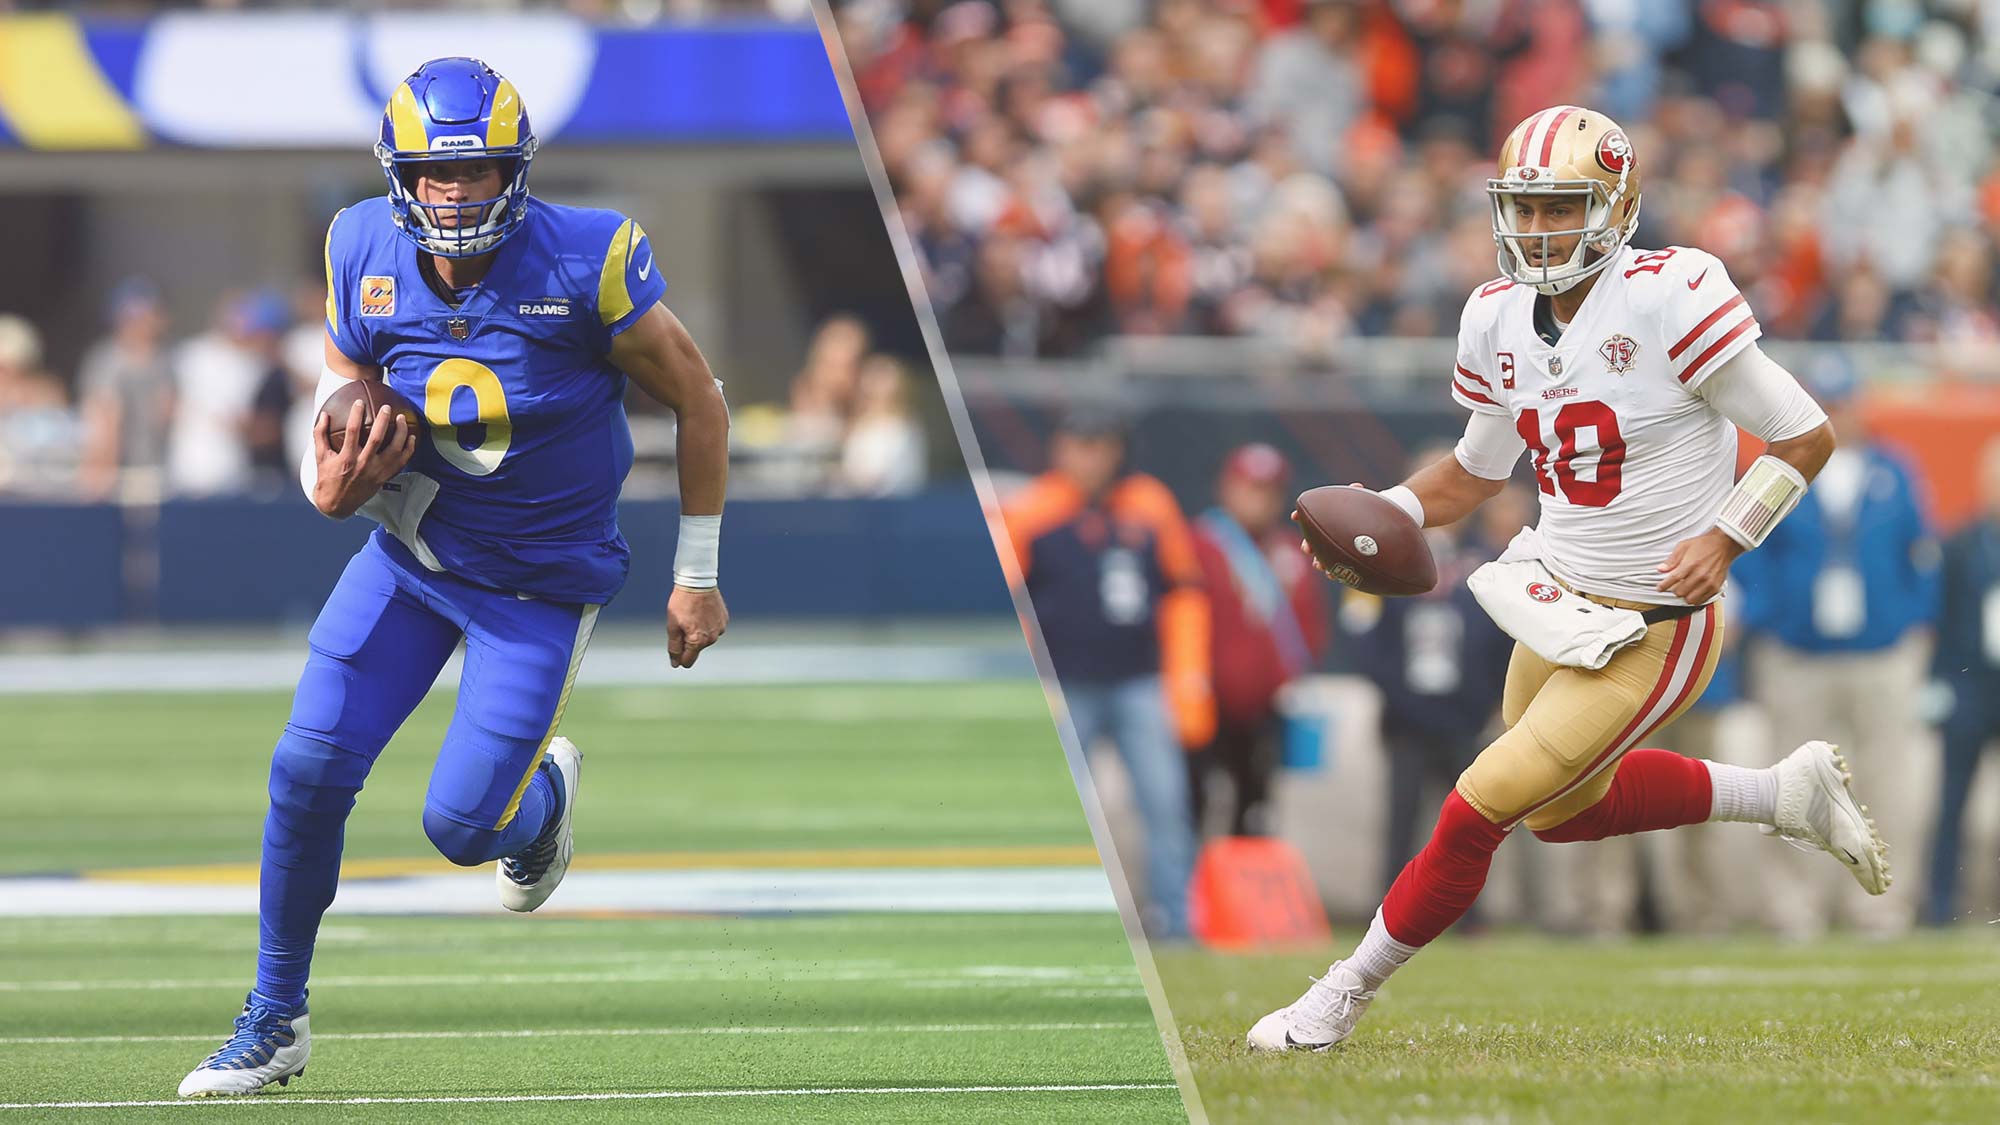 Rams vs 49ers live stream is tonight: How to watch Monday Night